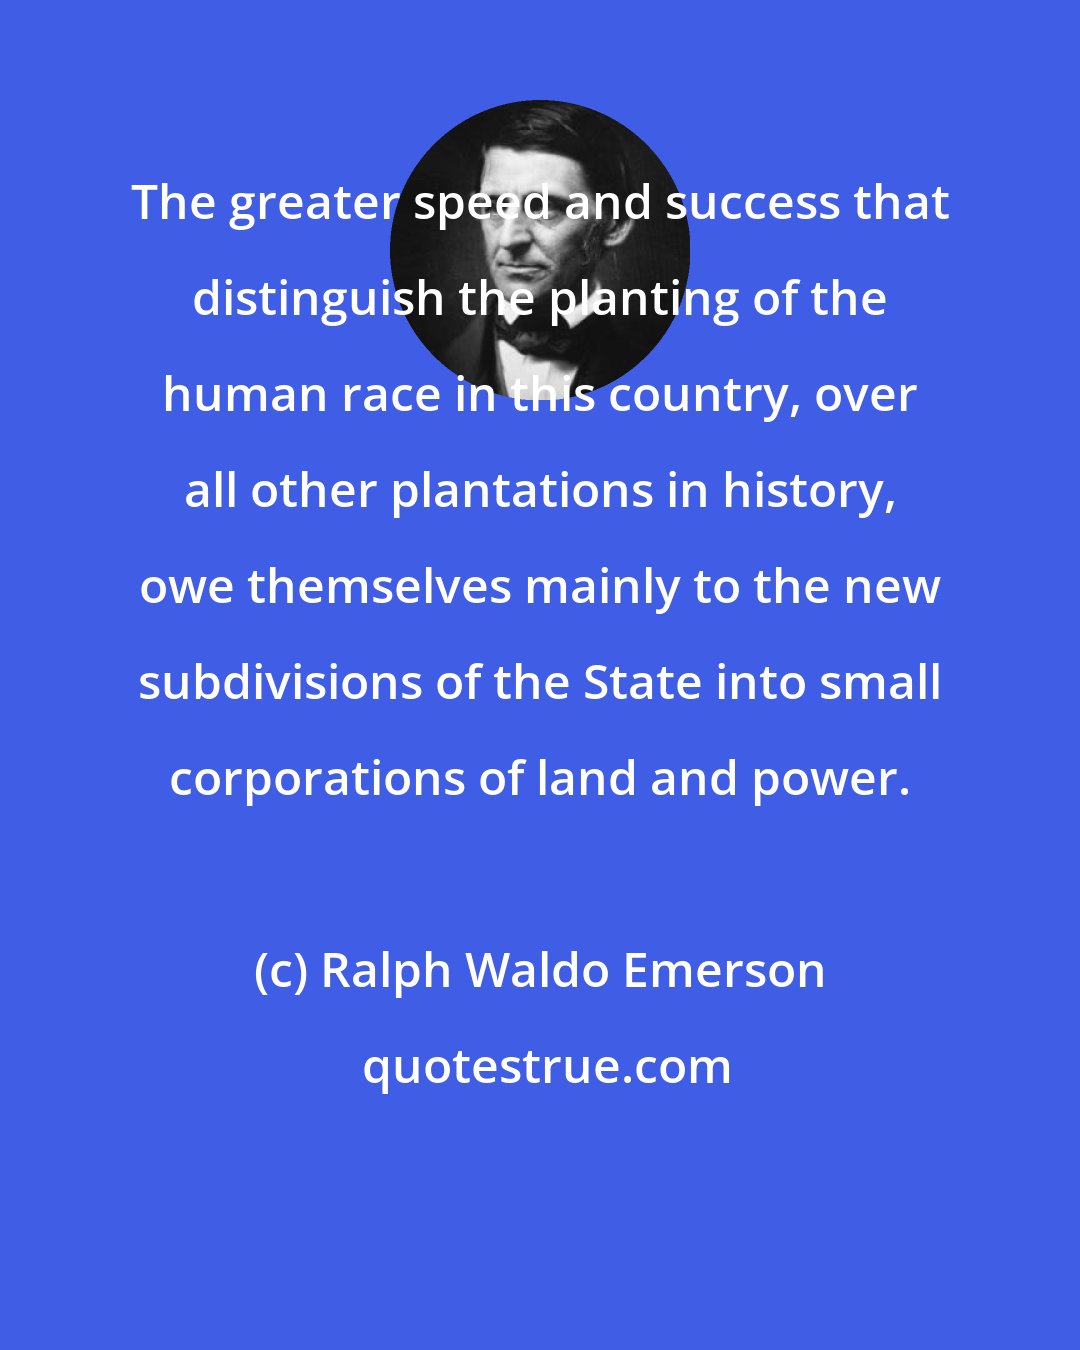 Ralph Waldo Emerson: The greater speed and success that distinguish the planting of the human race in this country, over all other plantations in history, owe themselves mainly to the new subdivisions of the State into small corporations of land and power.